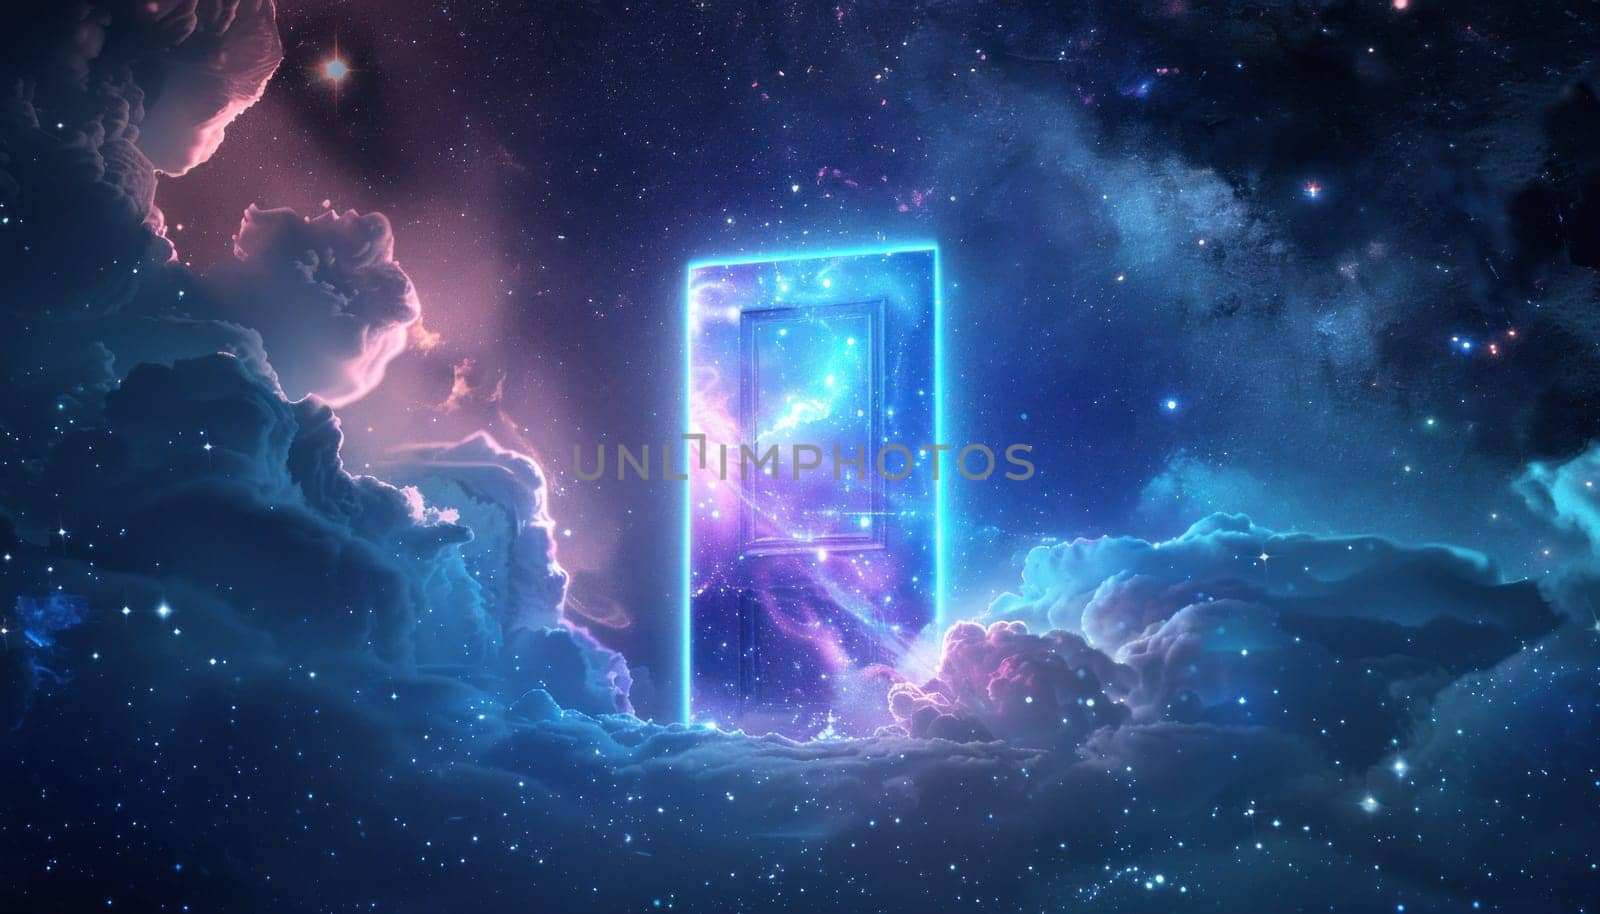 A door is shown in a space filled with stars and clouds. The door is glowing and he is a portal to another world. Scene is mysterious and otherworldly